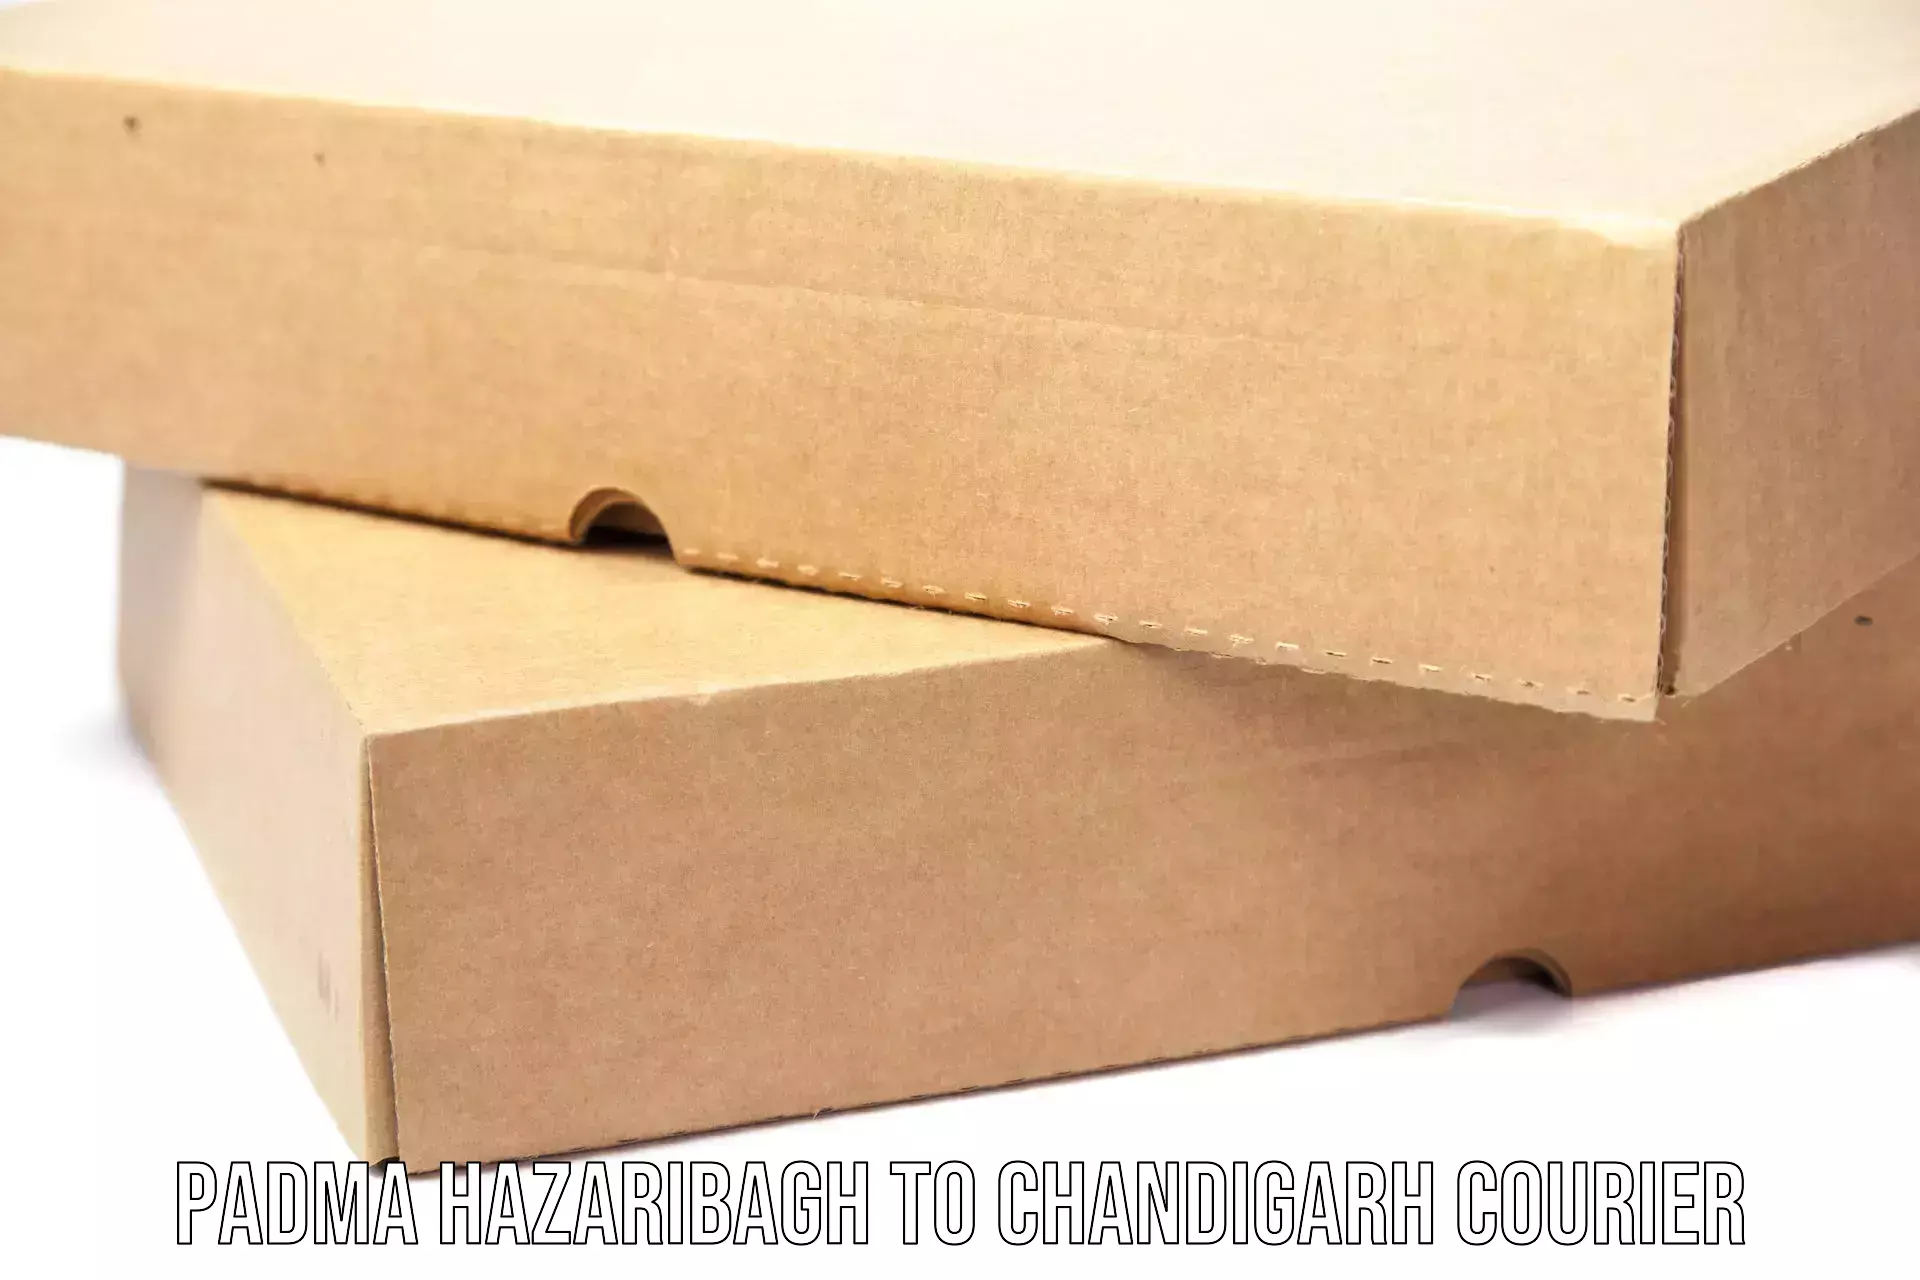 Round-the-clock parcel delivery Padma Hazaribagh to Chandigarh